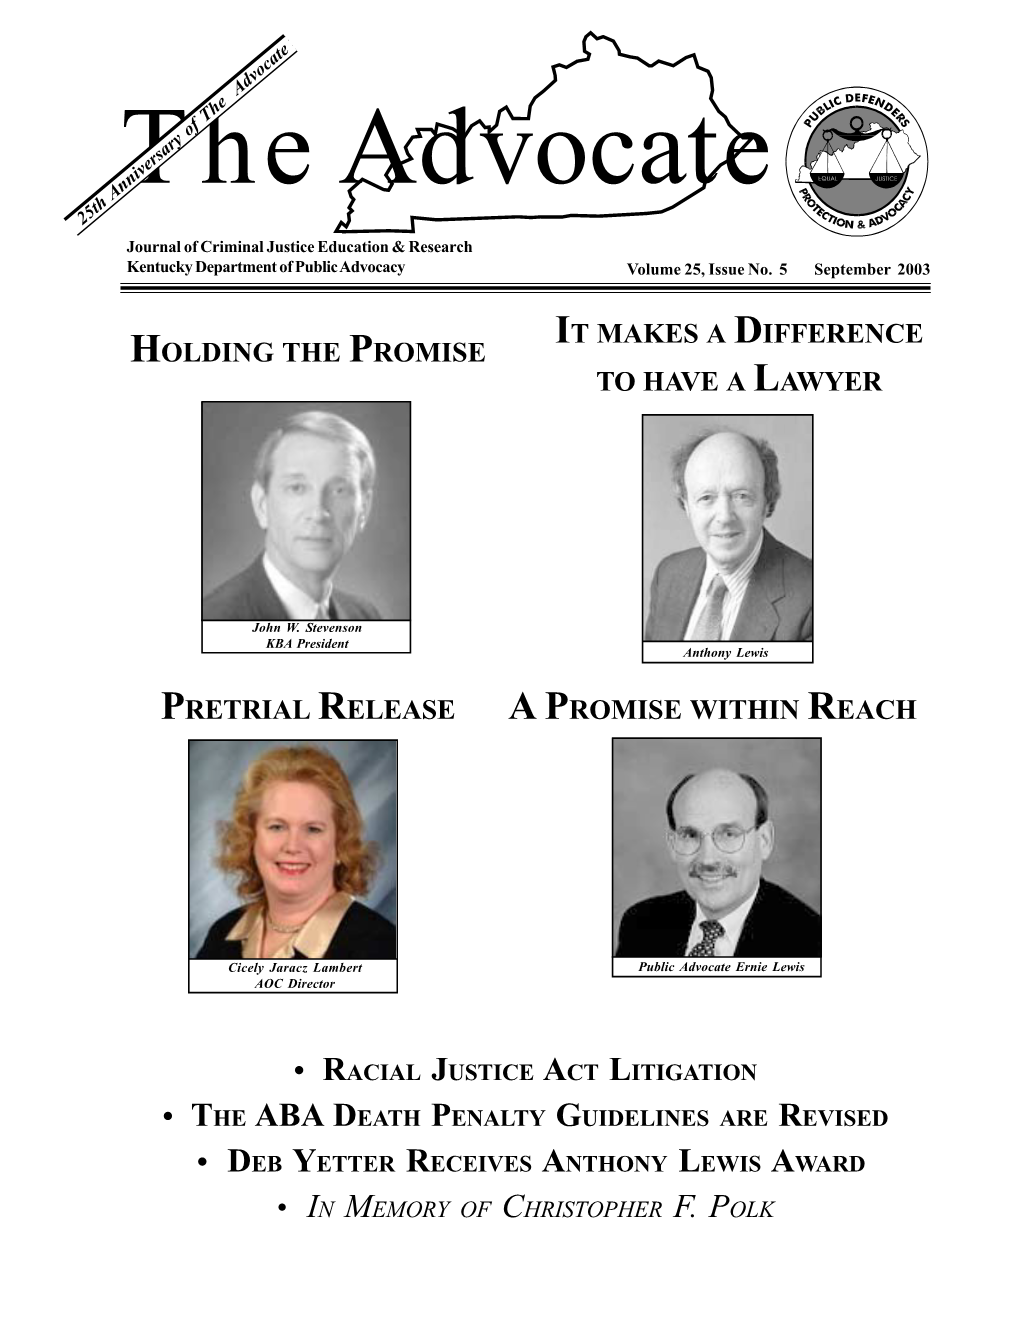 The Advocate 25Th Anniversary of the Advocate Journal of Criminal Justice Education & Research Kentucky Department of Public Advocacy Volume 25, Issue No